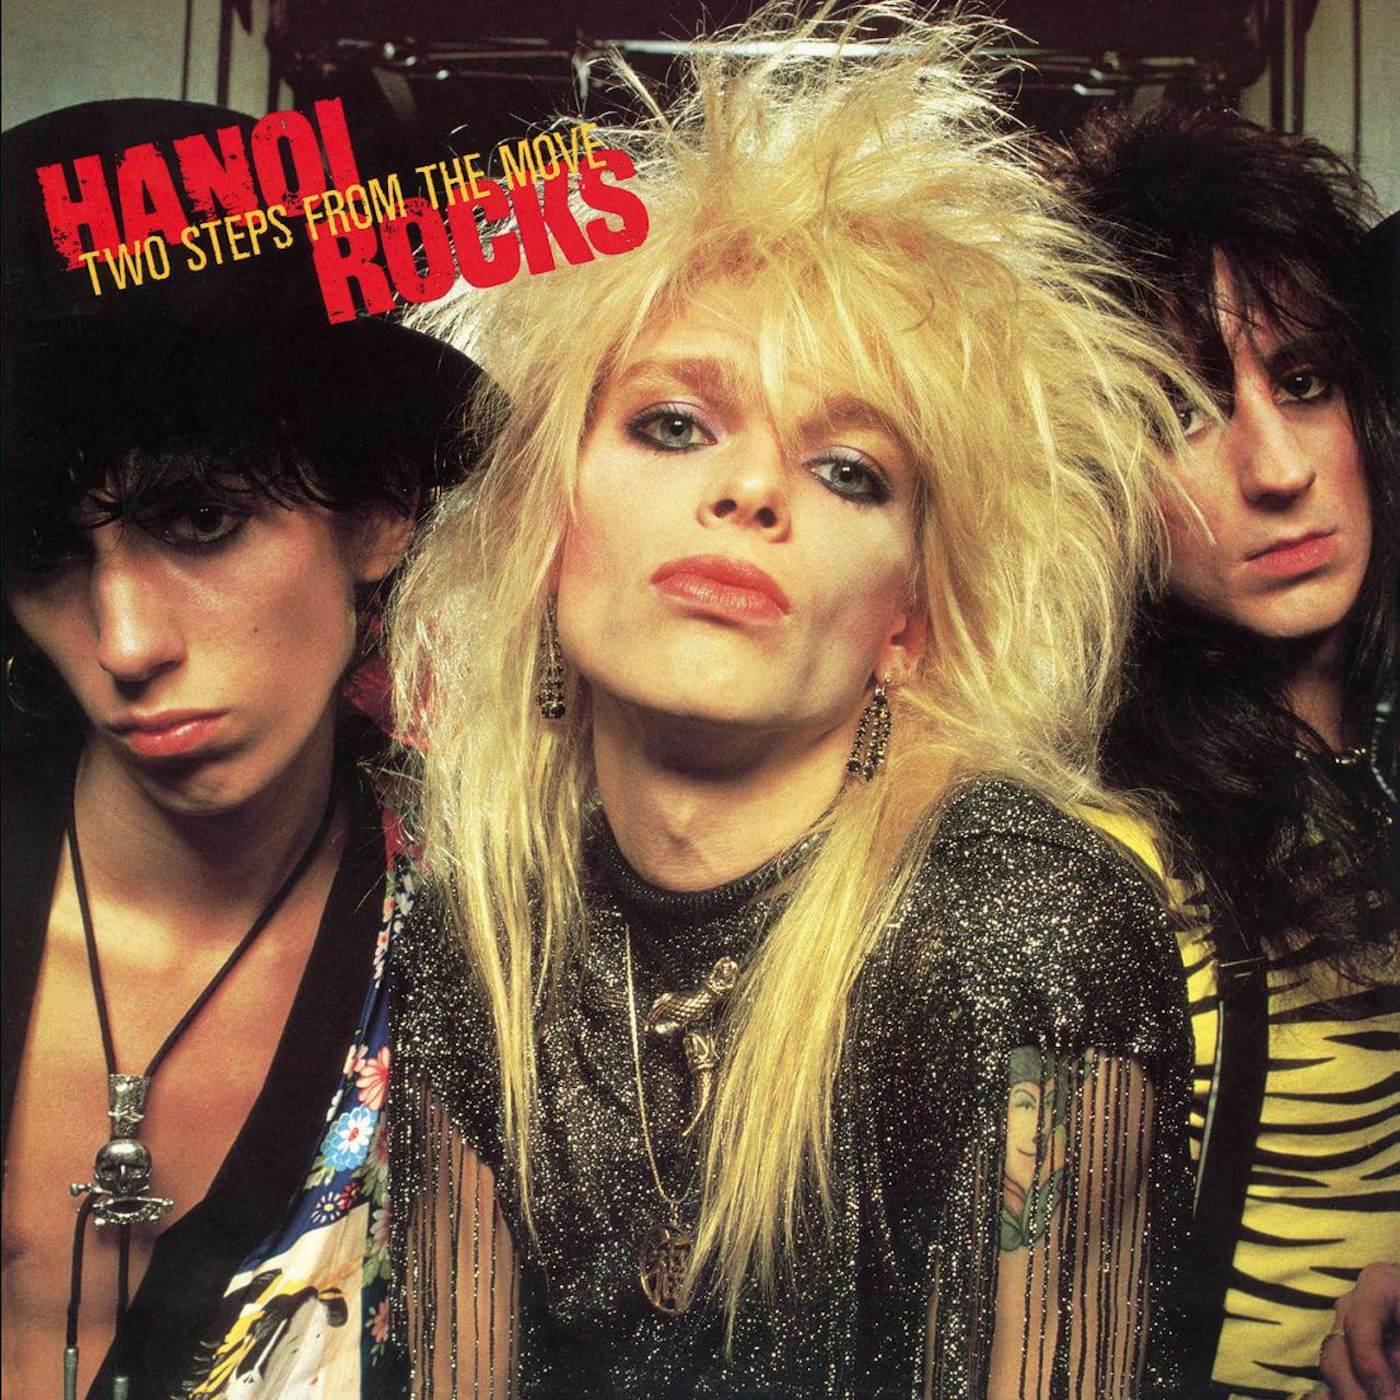 Hanoi Rocks TWO STEPS FROM THE MOVE (180G) Vinyl Record